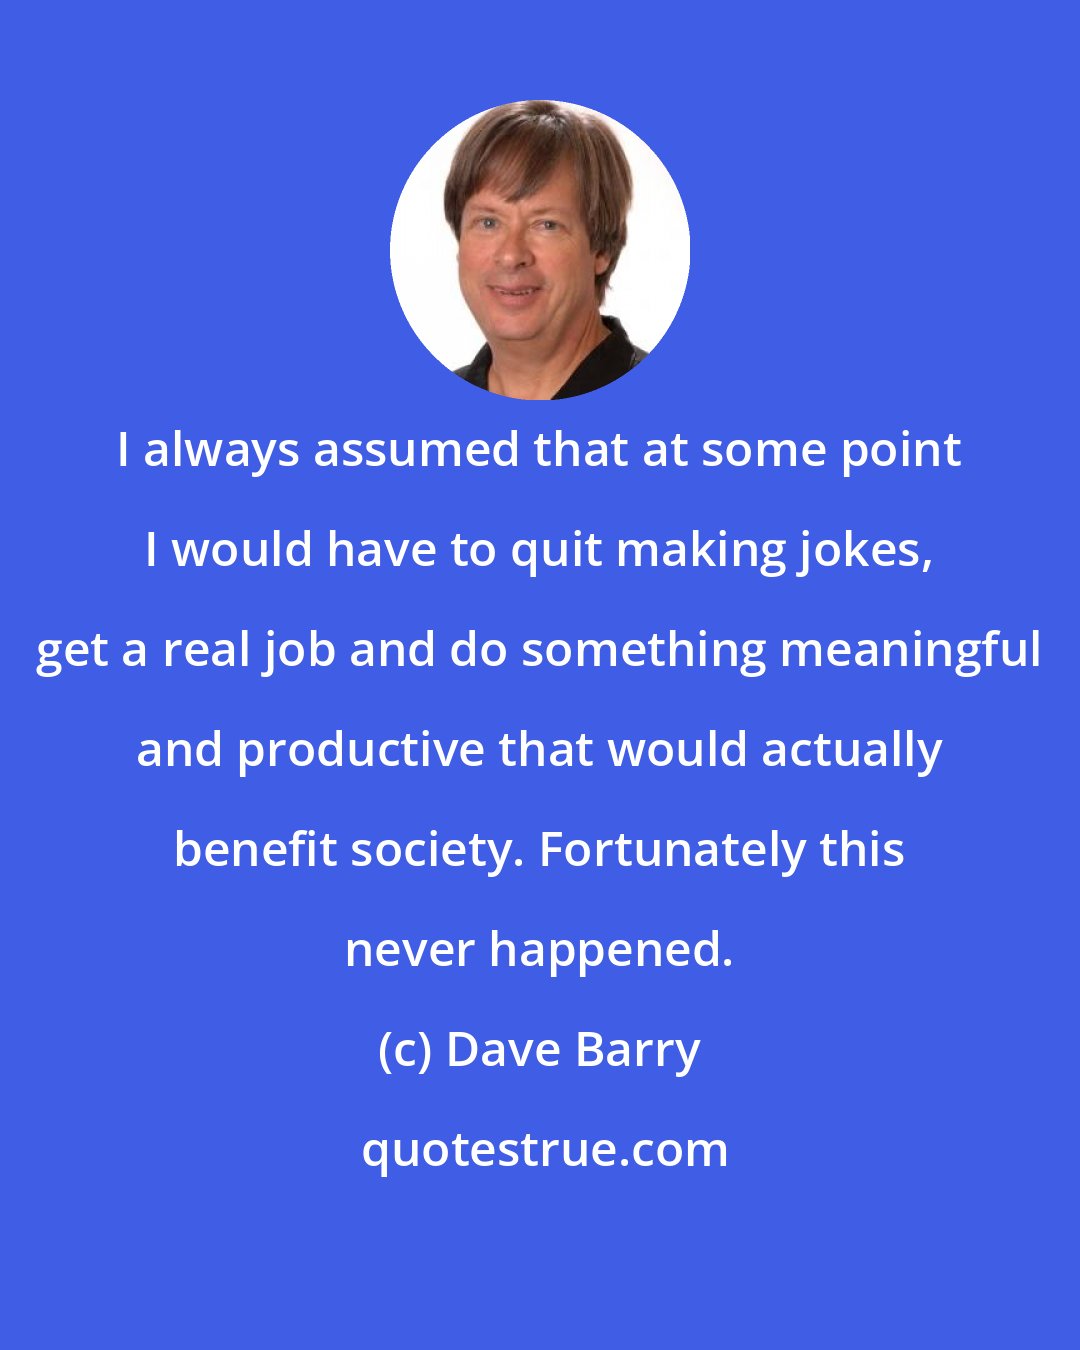 Dave Barry: I always assumed that at some point I would have to quit making jokes, get a real job and do something meaningful and productive that would actually benefit society. Fortunately this never happened.